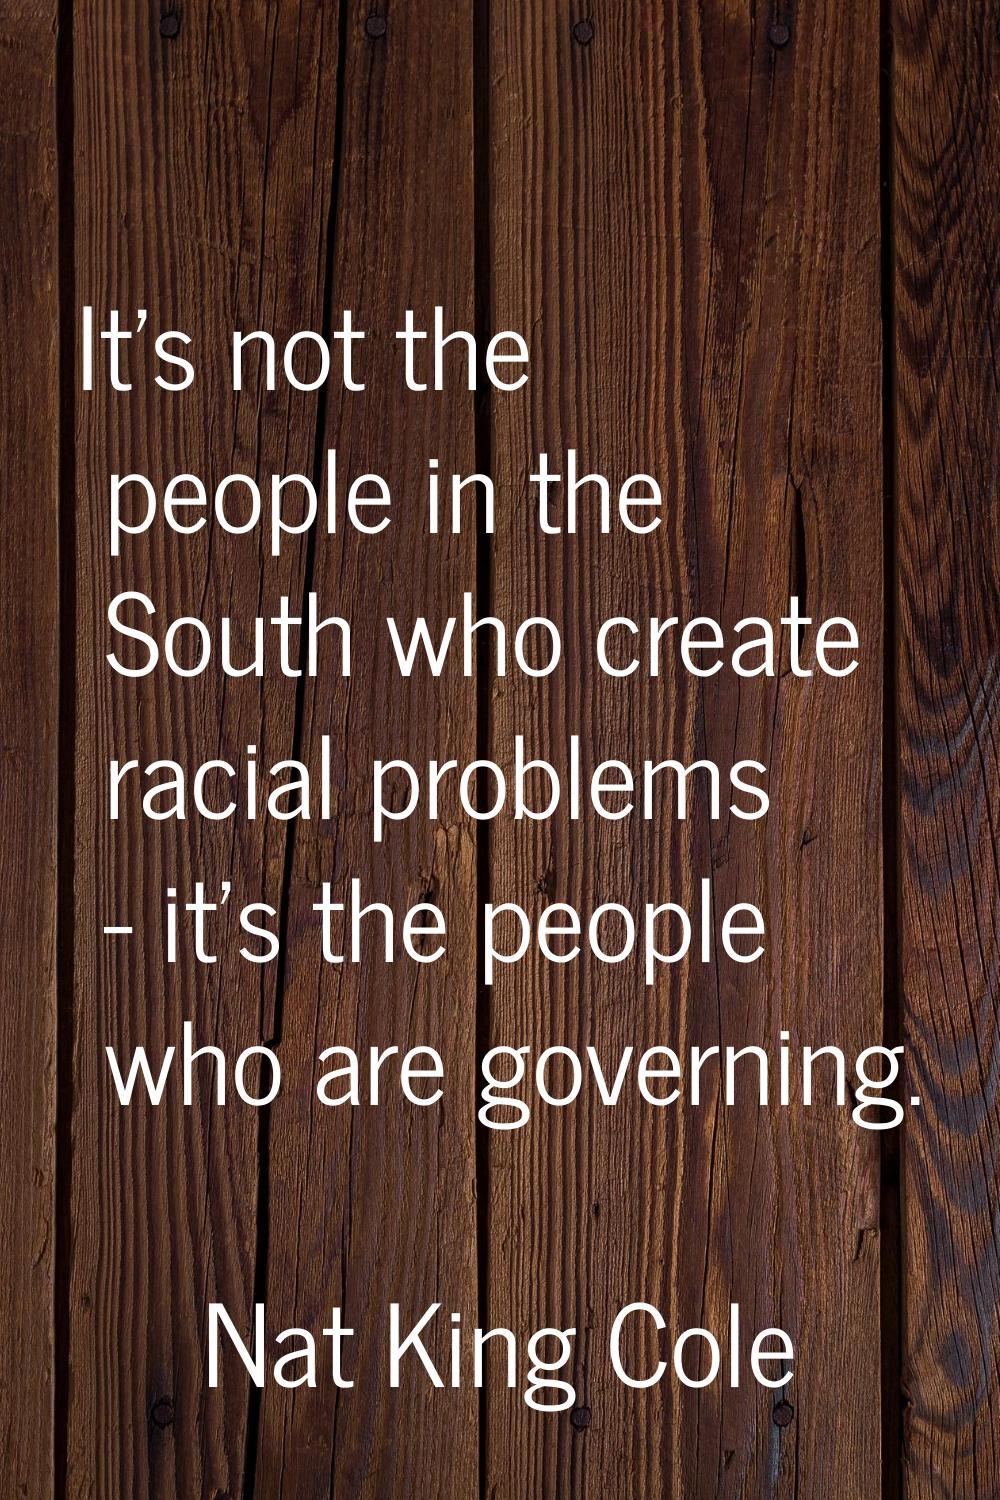 It's not the people in the South who create racial problems - it's the people who are governing.